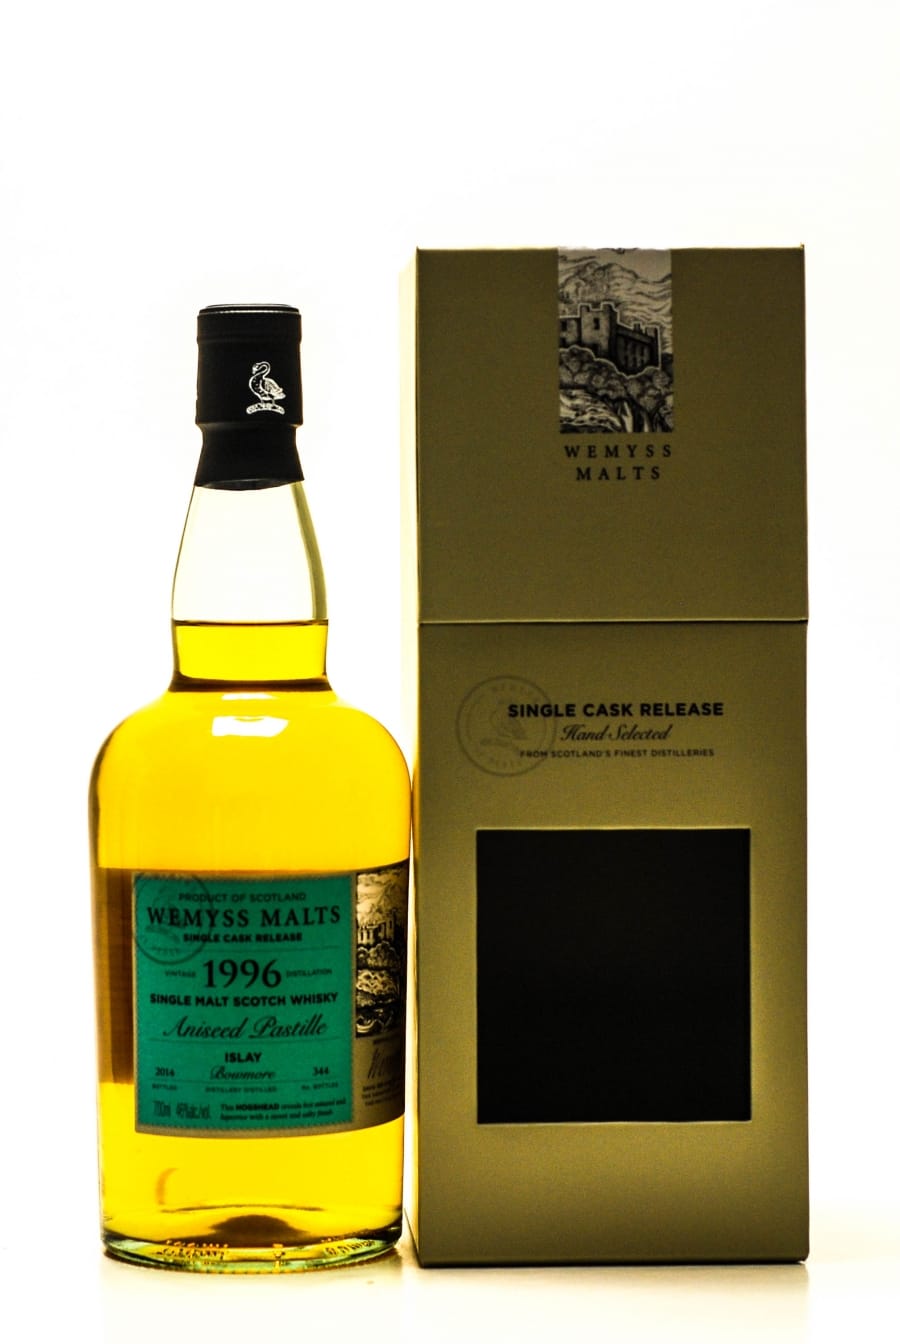 Bowmore - 18 Years Old Aniseed Pastille Wemyss Malts 46% 1996